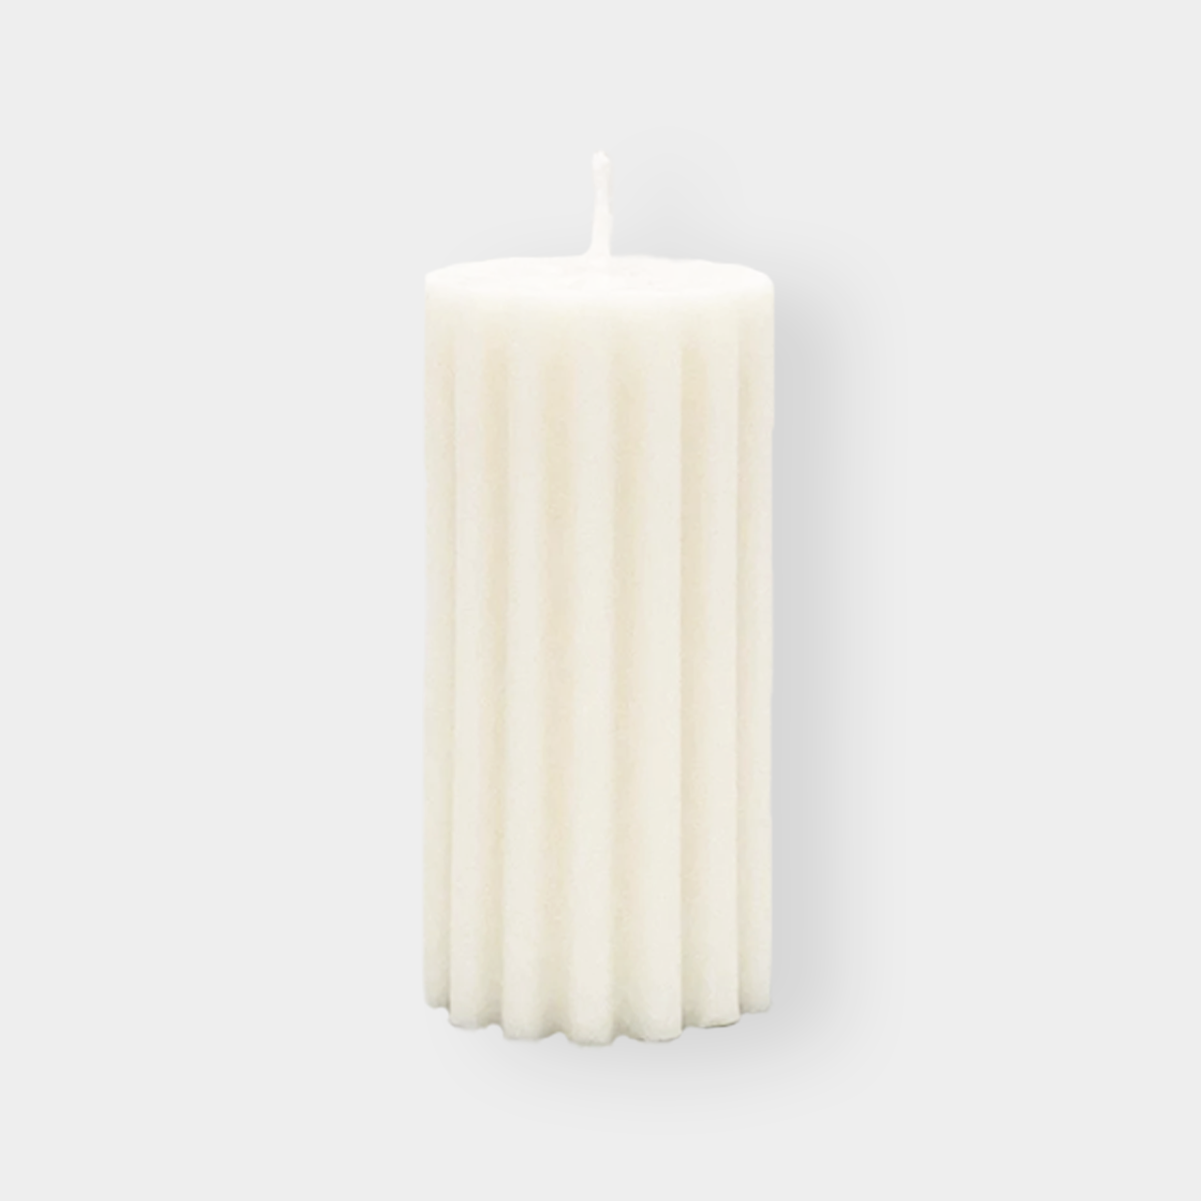 Make Scents of It Fluted Candle, White (6693558845628)